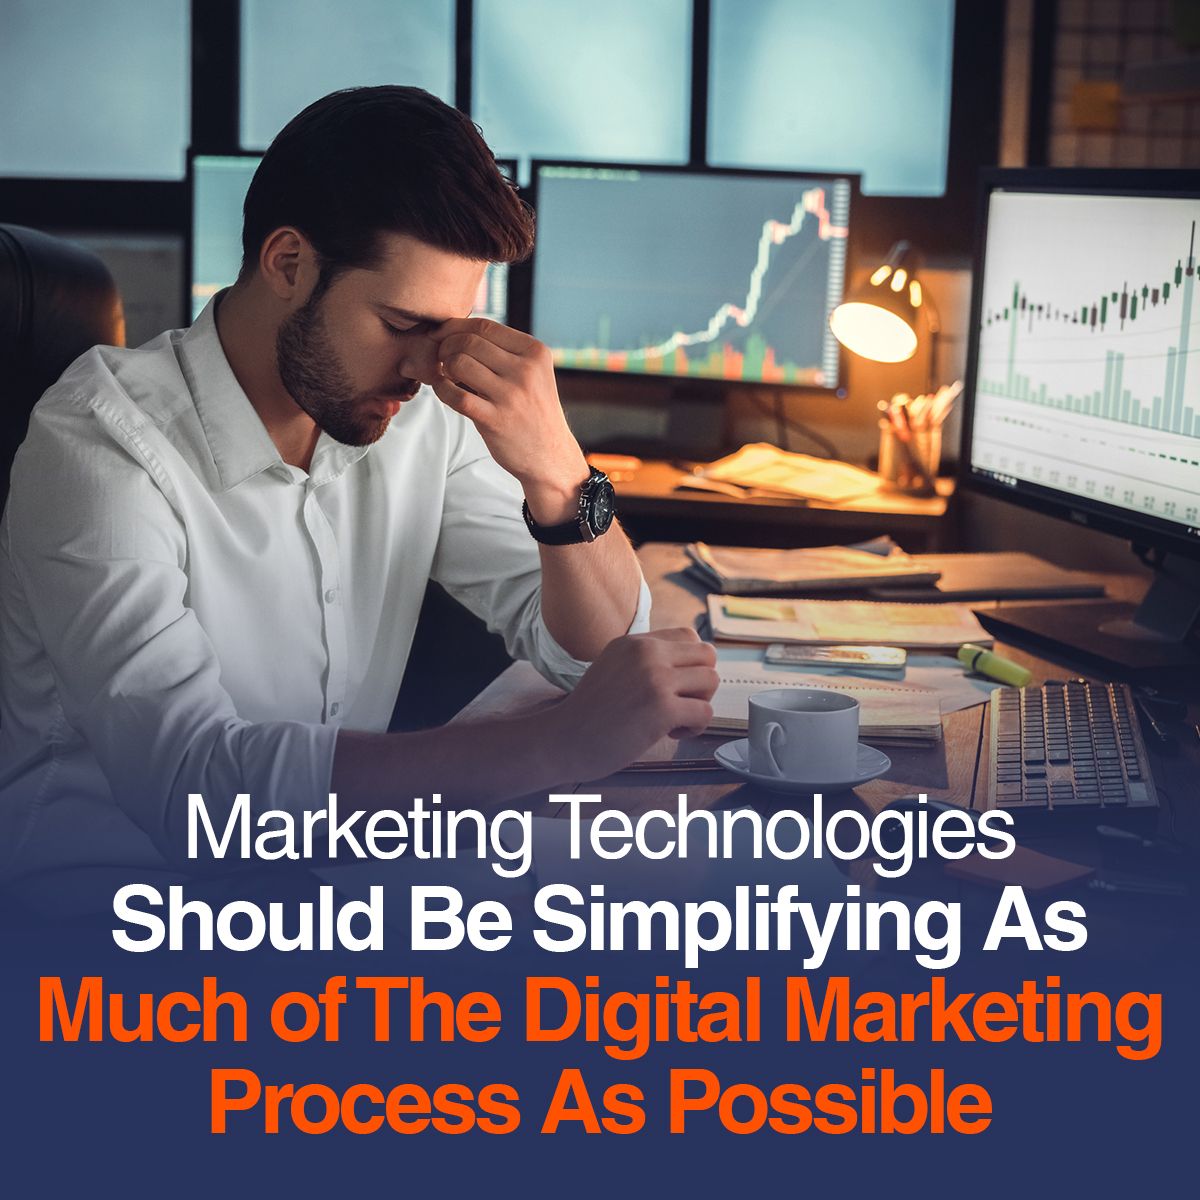 Marketing Technologies Should Be Simplifying As Much of The Digital Marketing Process As Possible